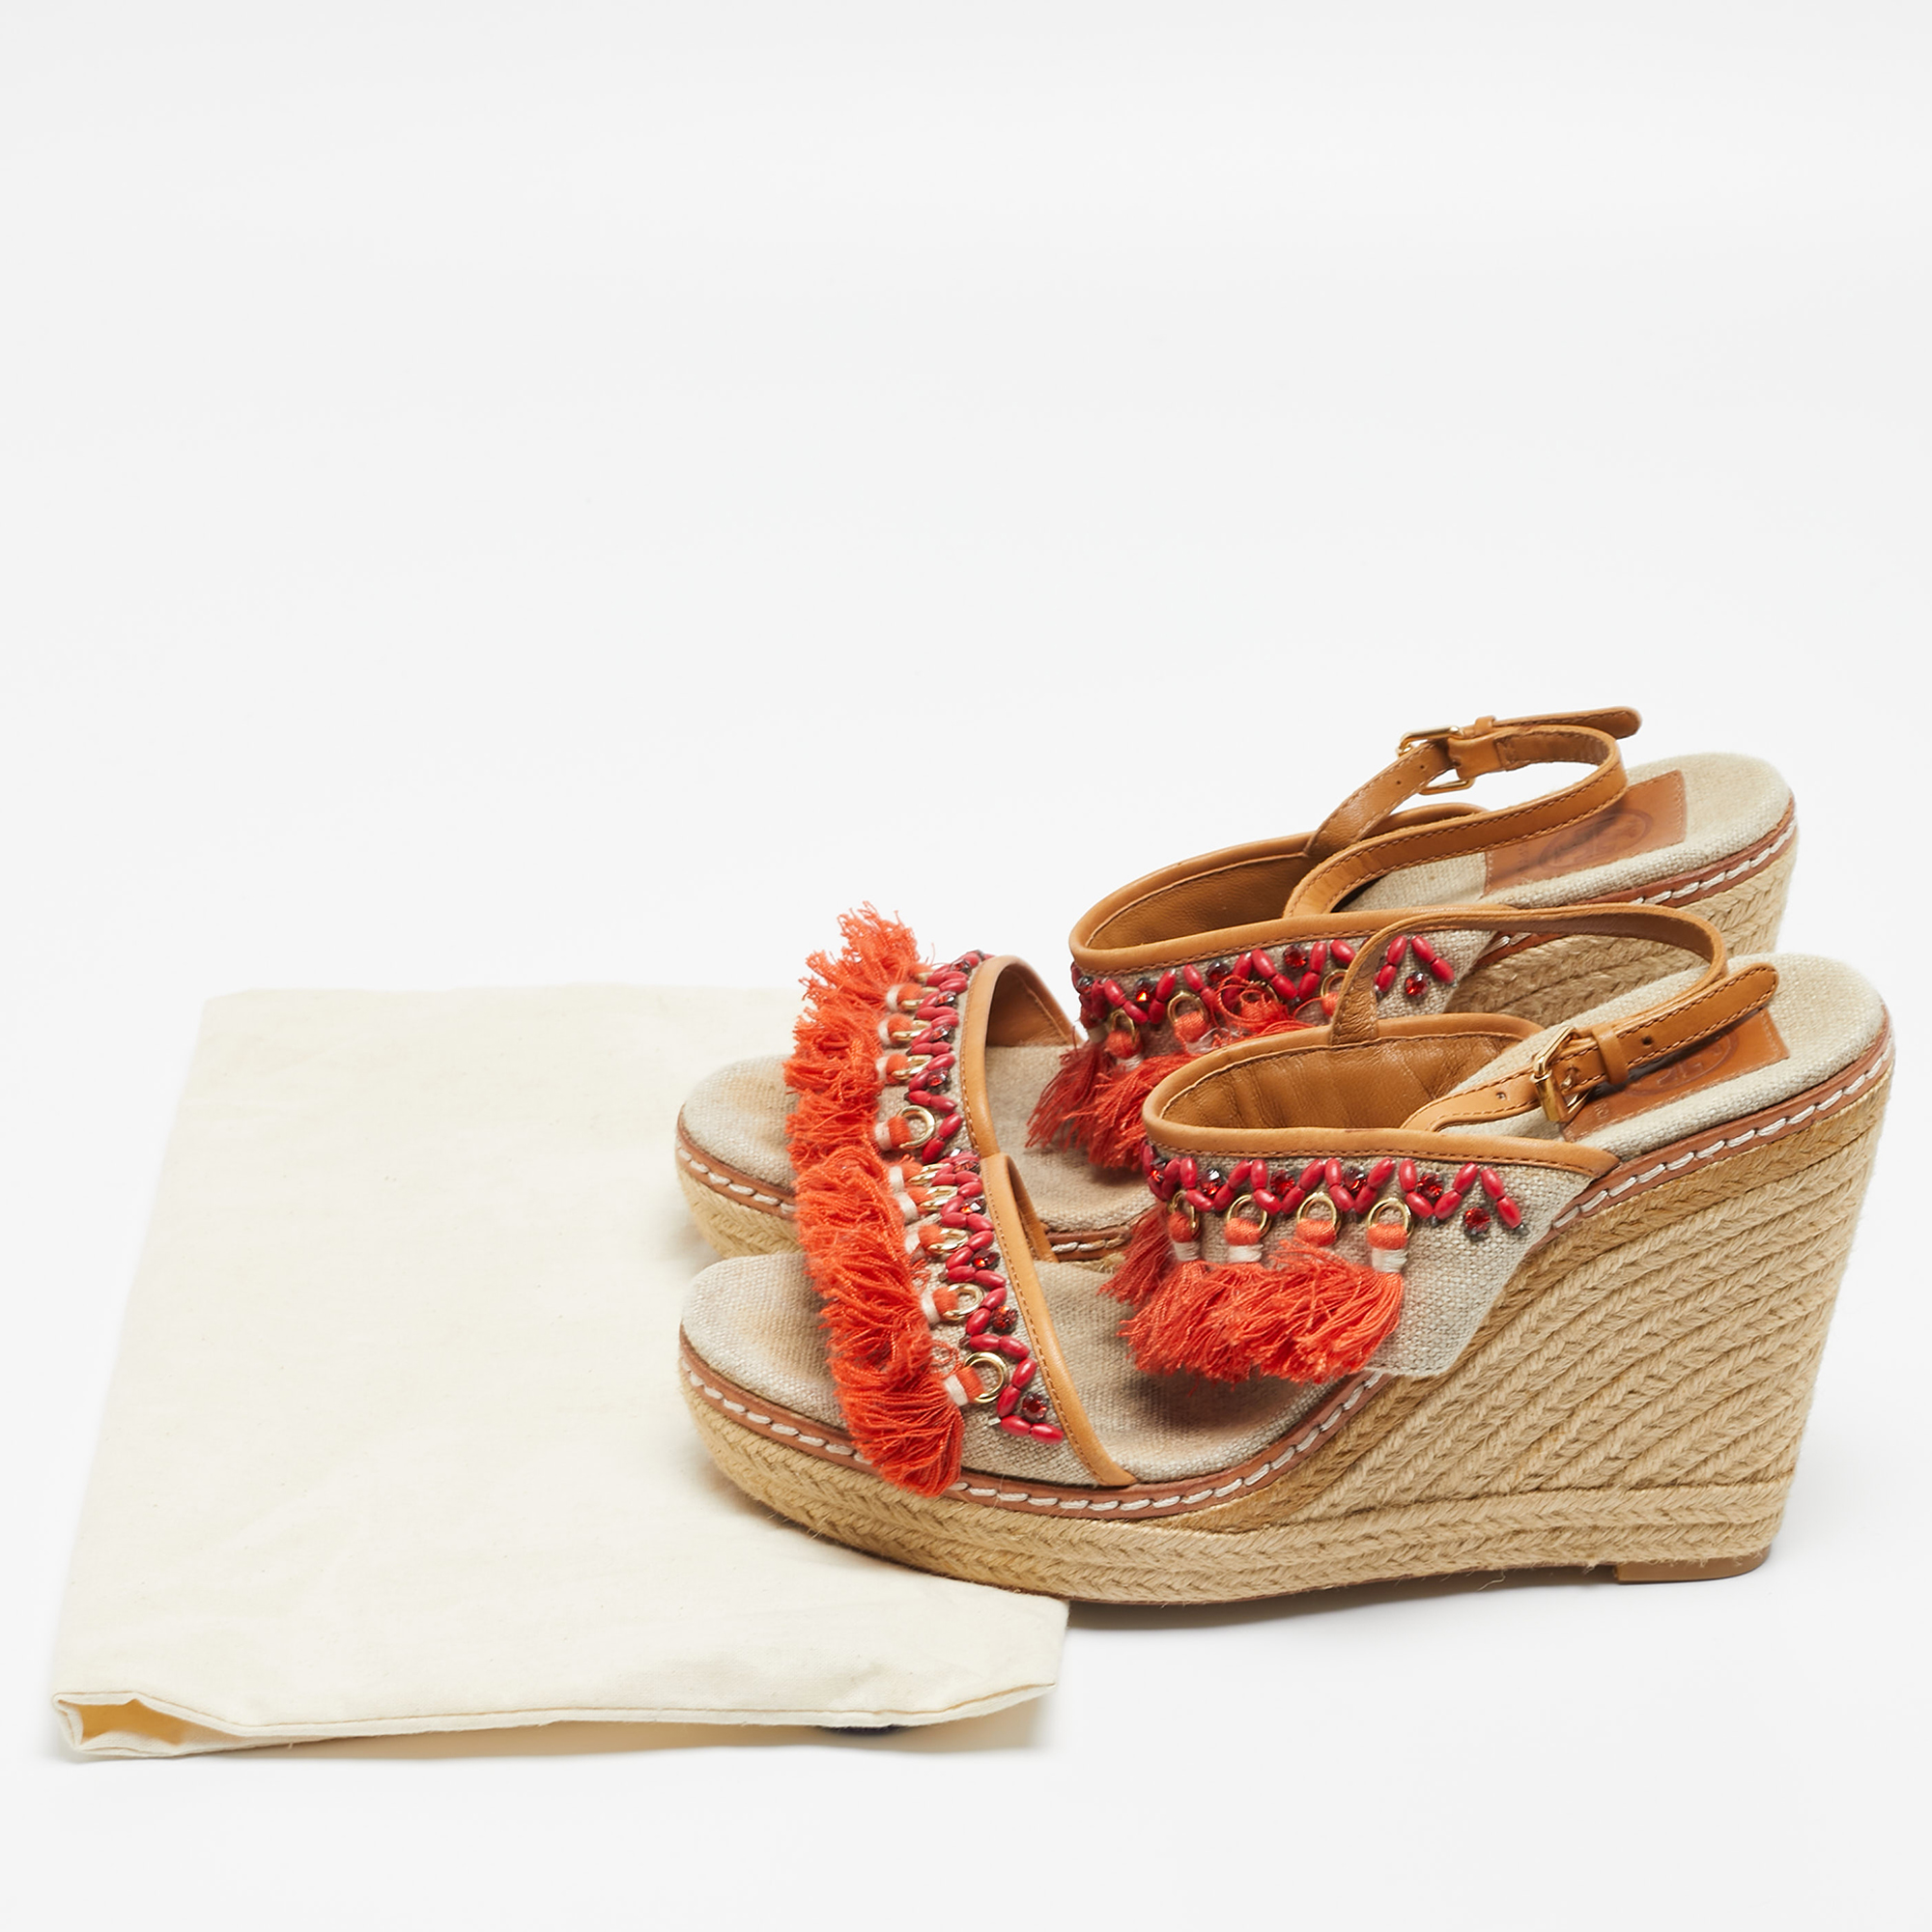 Tory Burch Beige/Orange Canvas And Leather Niyah Espadrille Wedge Sandals Size 40